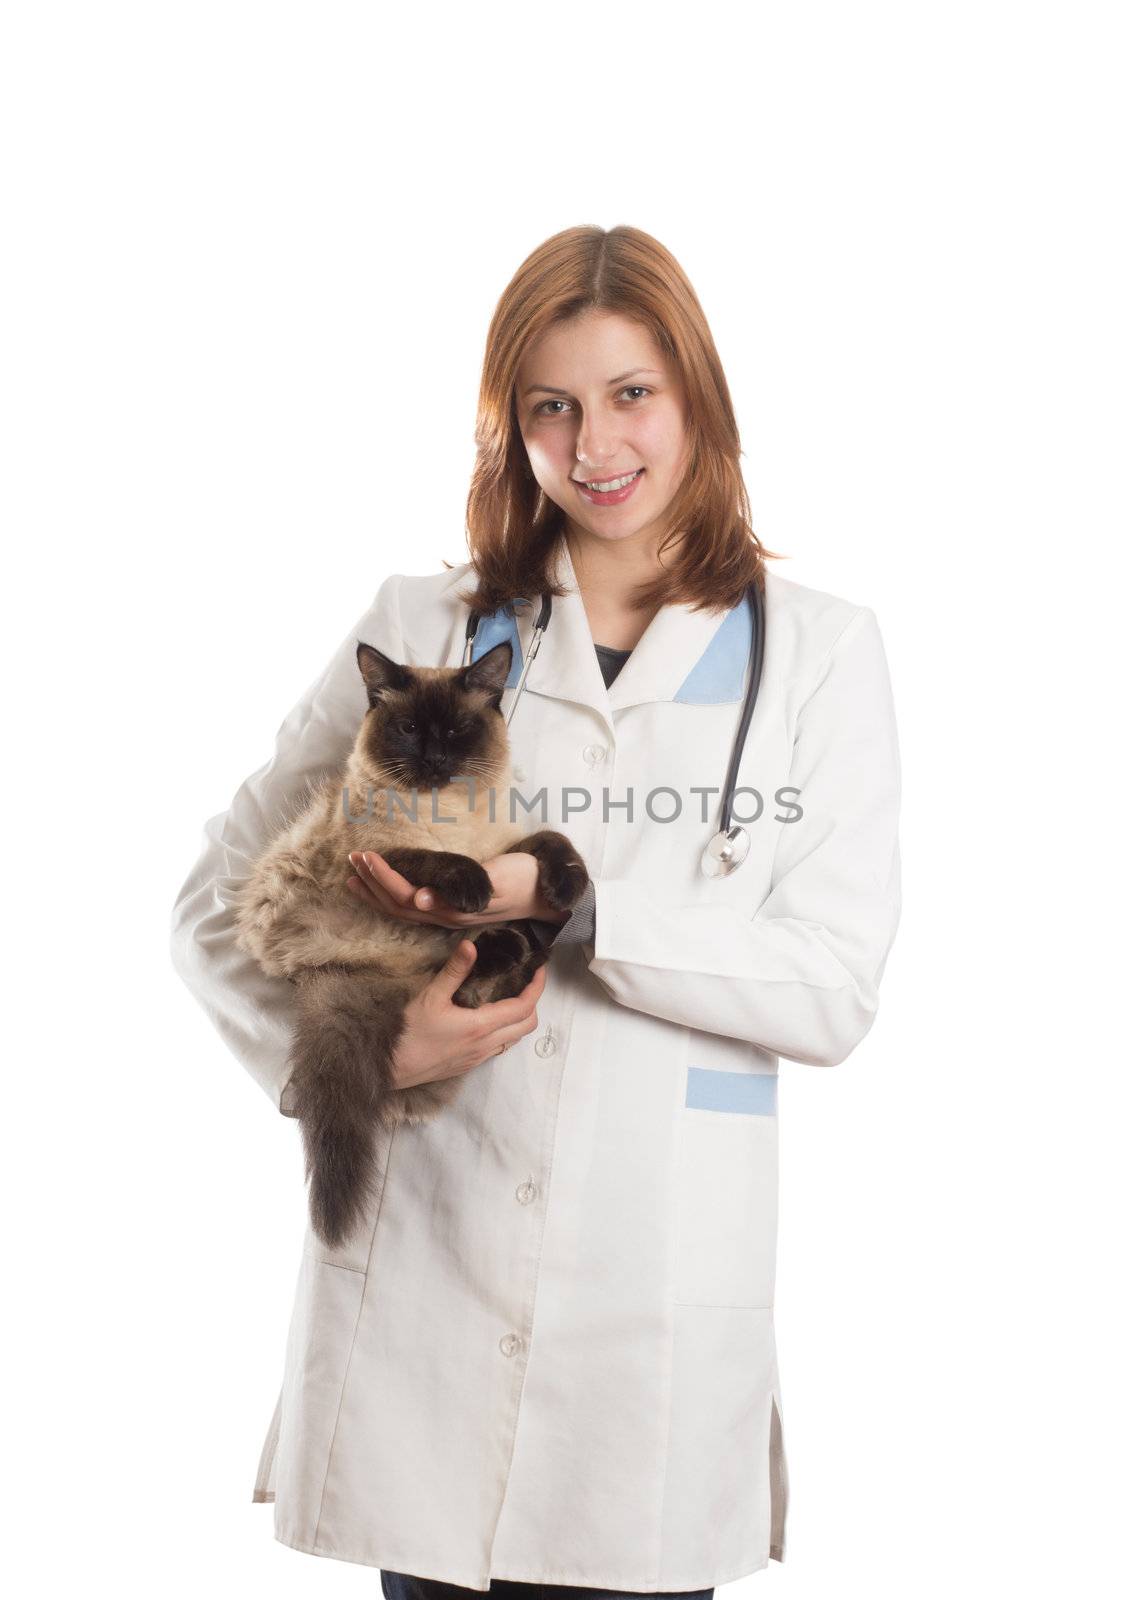 Girl in a medical uniform with a Siamese cat  by gurin_oleksandr